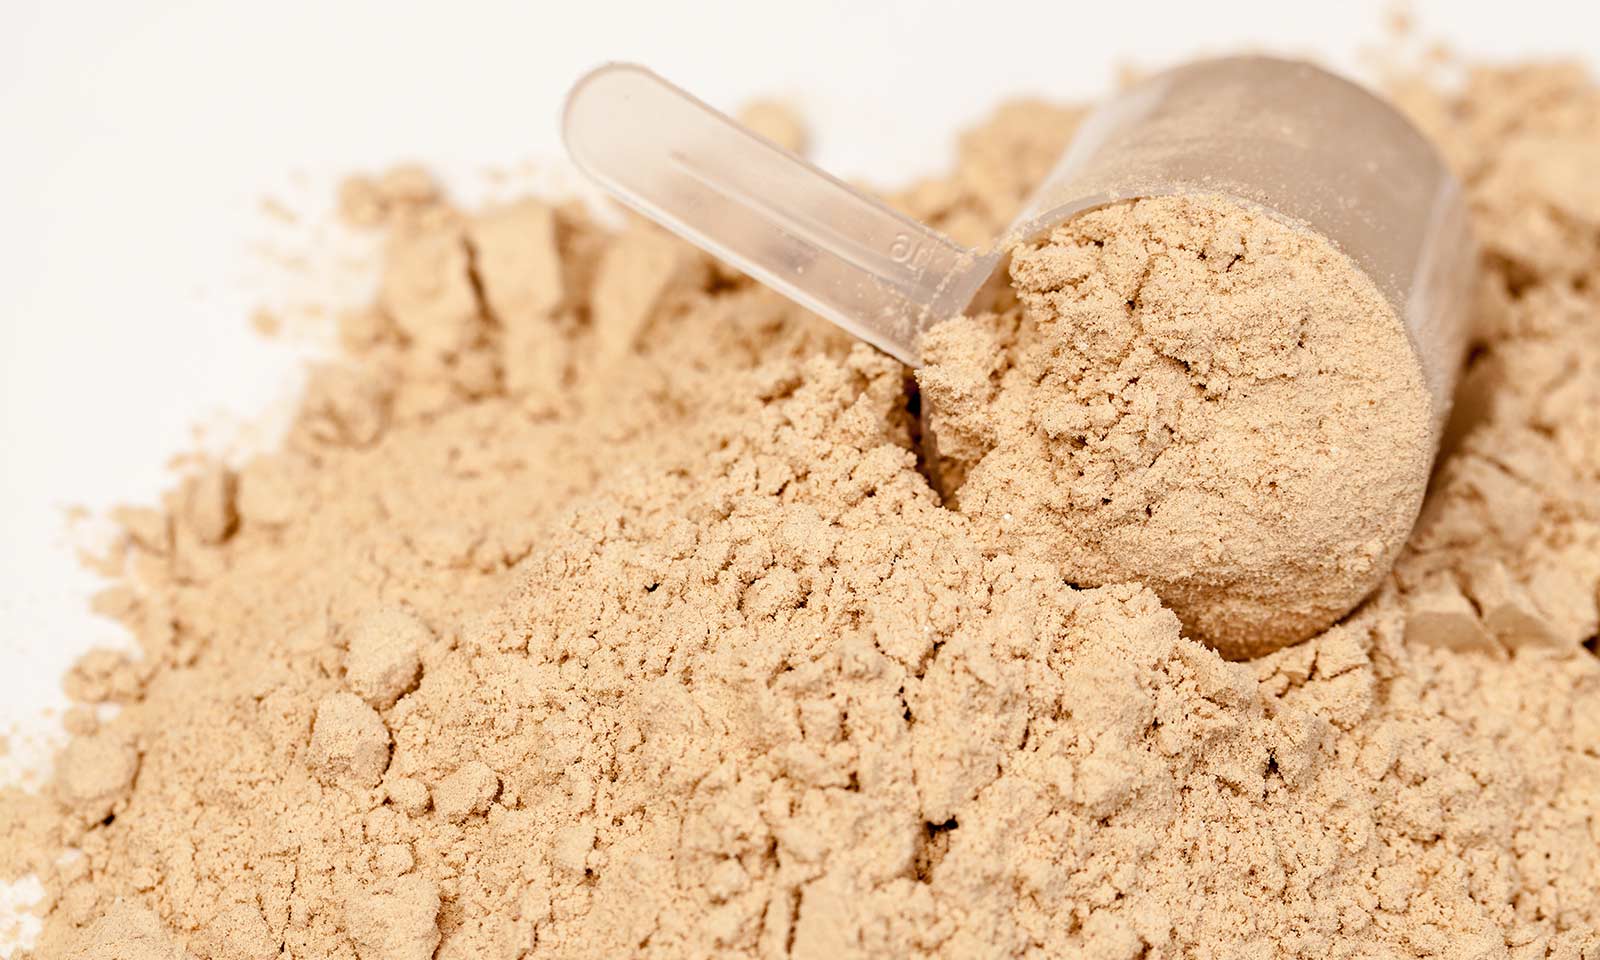 6 Things To Look For When Selecting A Protein Supplement